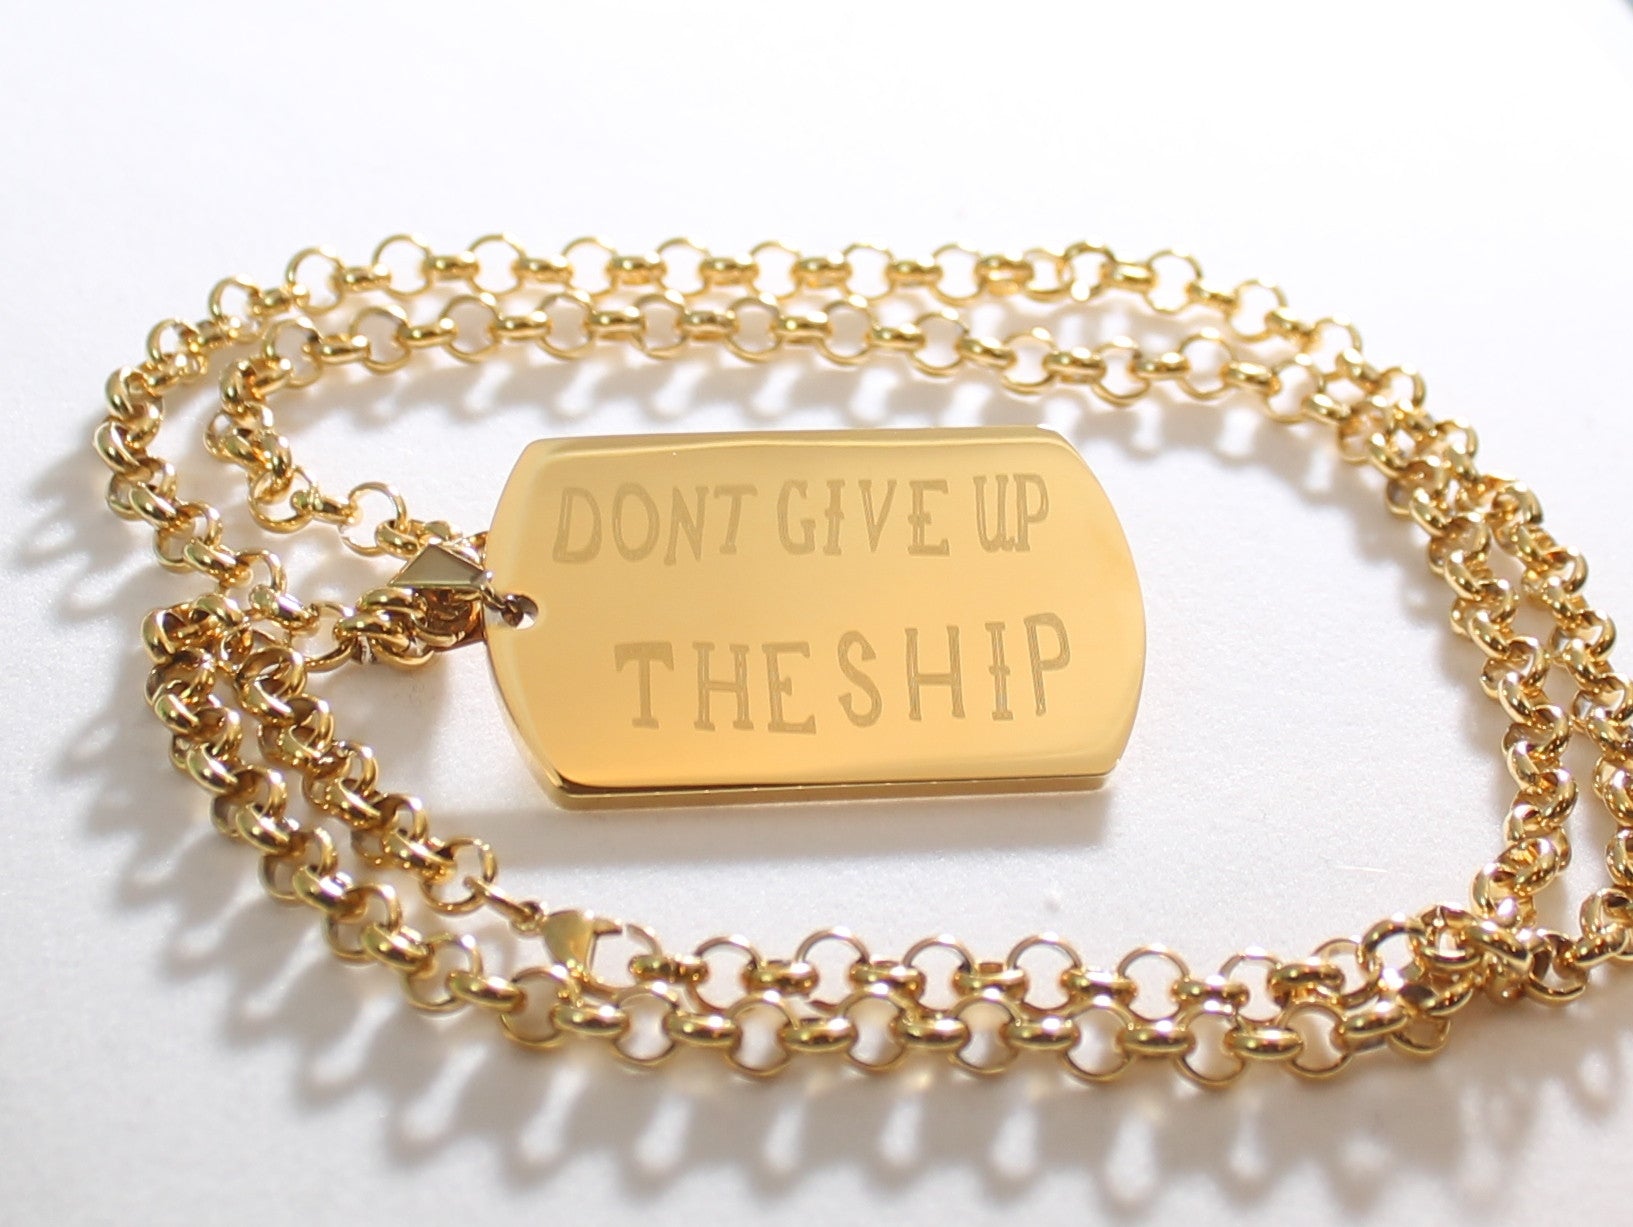 DONT GIVE UP THE SHIP IPG GOLD NAVY MILITARY MOTIVATIONAL THICK STAINLESS STEEL DOG TAG ROLO CHAIN - Samstagsandmore